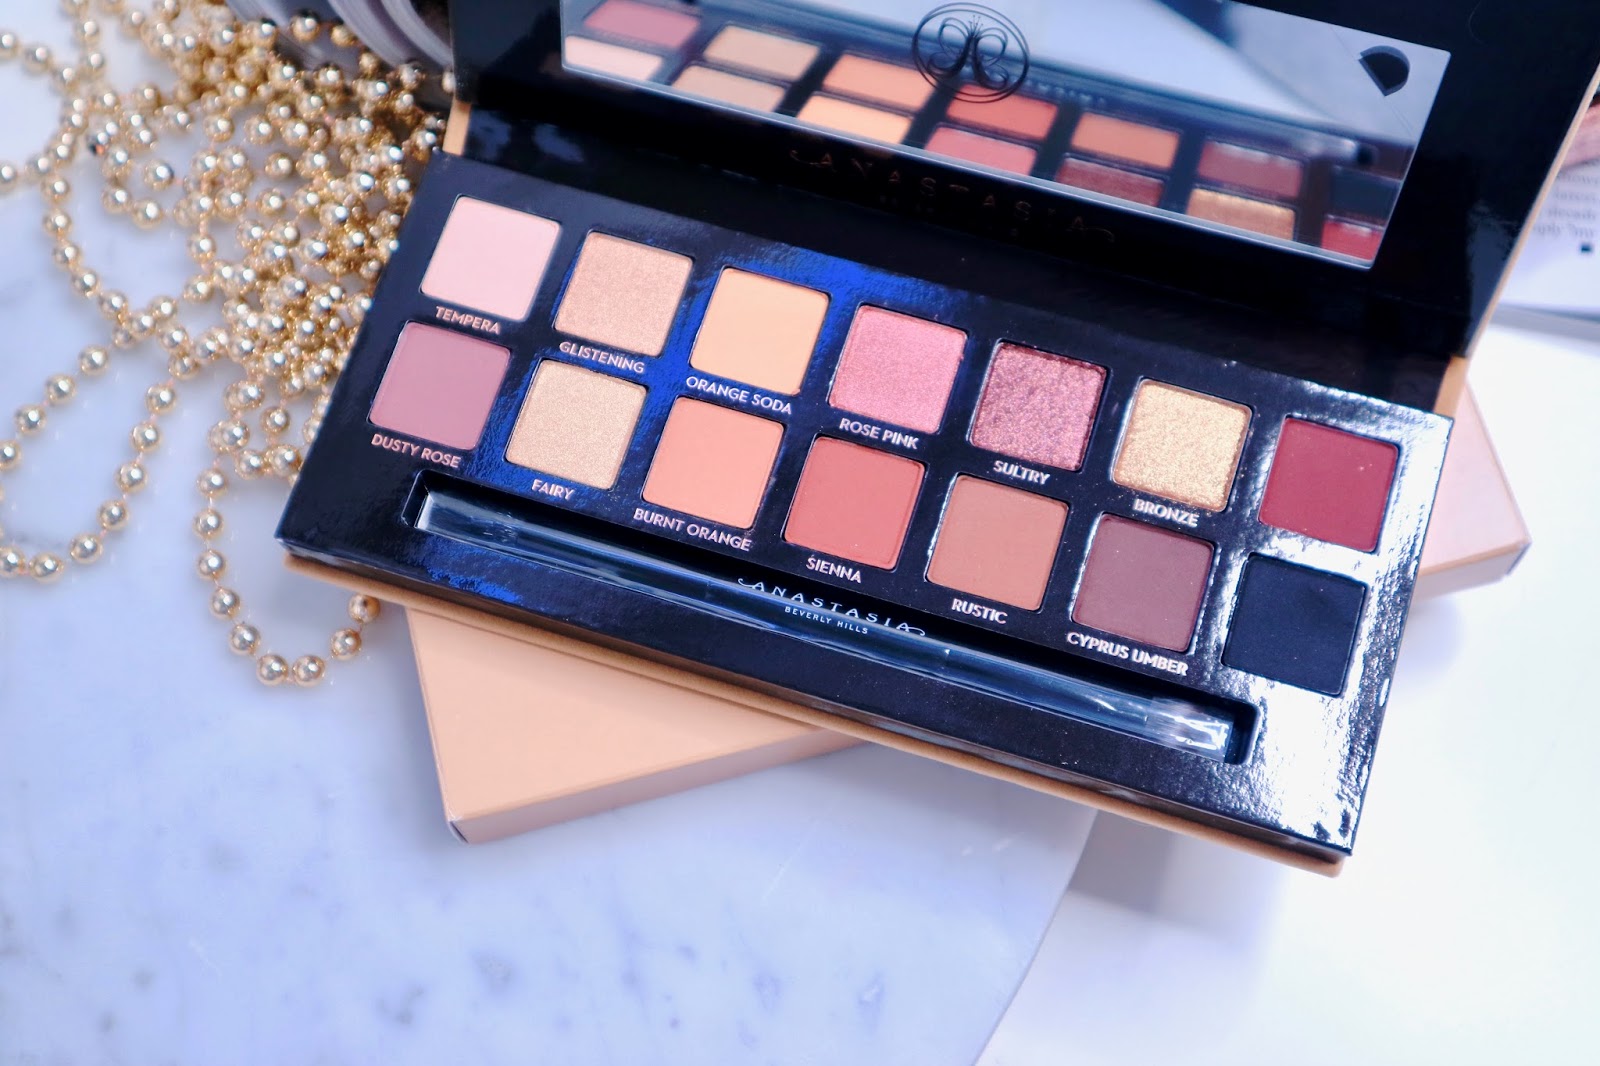 Anastasia Beverly Hills Soft Glam palette review with swatches